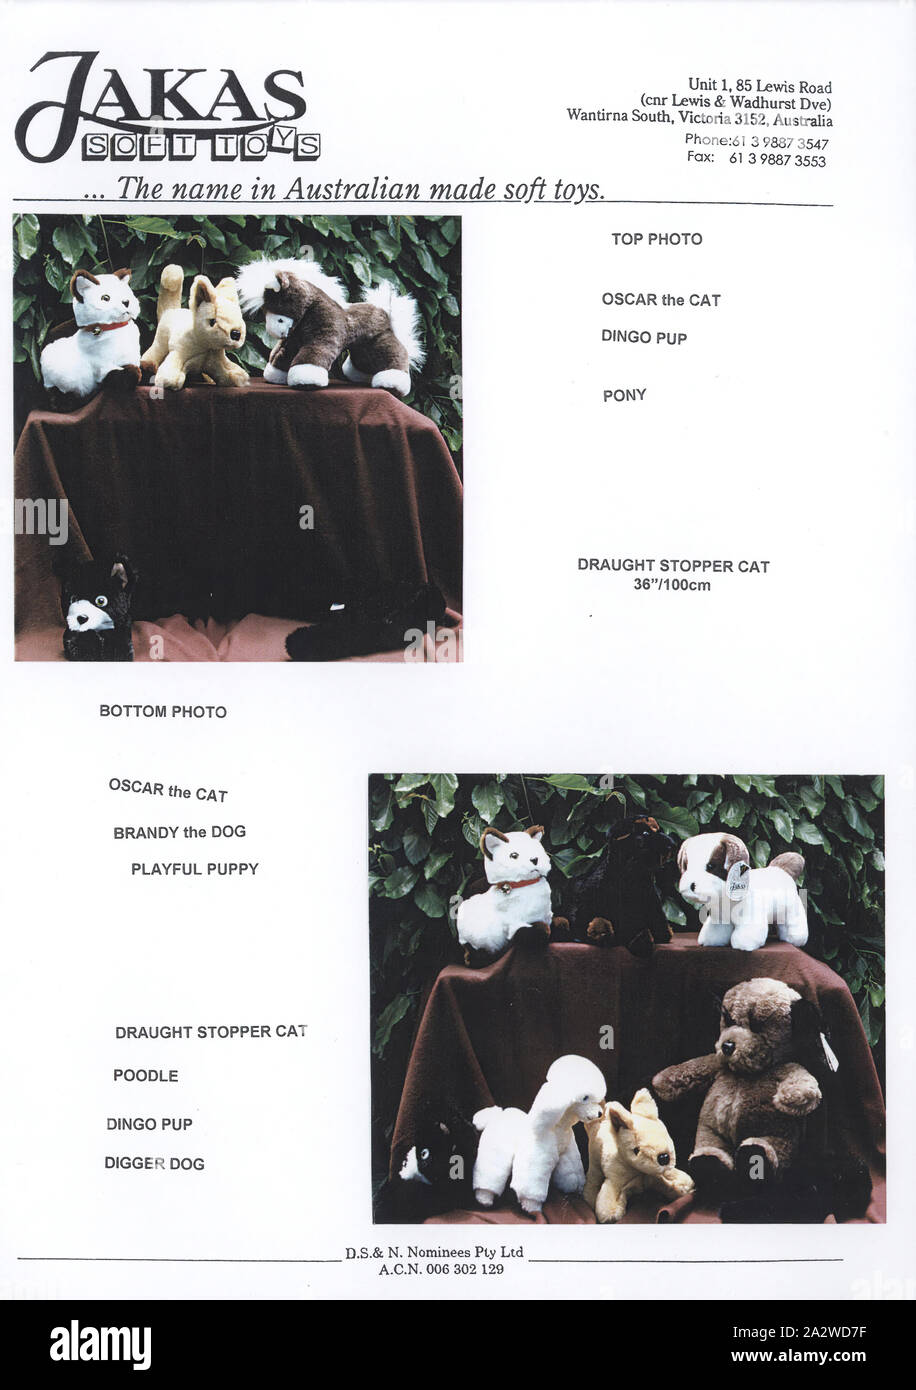 Advertising Flyer - Jakas Soft Toys, Domestic Pet Animals, Melbourne, circa 1998, A single page advertising flyer shows a range of pet animal soft toys, featuring cats, dogs, dingo pups and a pony, each with specific names for identification. Jakas Soft Toys was a Melbourne-based company which designed and manufactured genuine high quality soft toys from 1956. Their range included teddy bears, golliwogs and Australian native animals. Jakas Soft Toys ceased production in Stock Photo